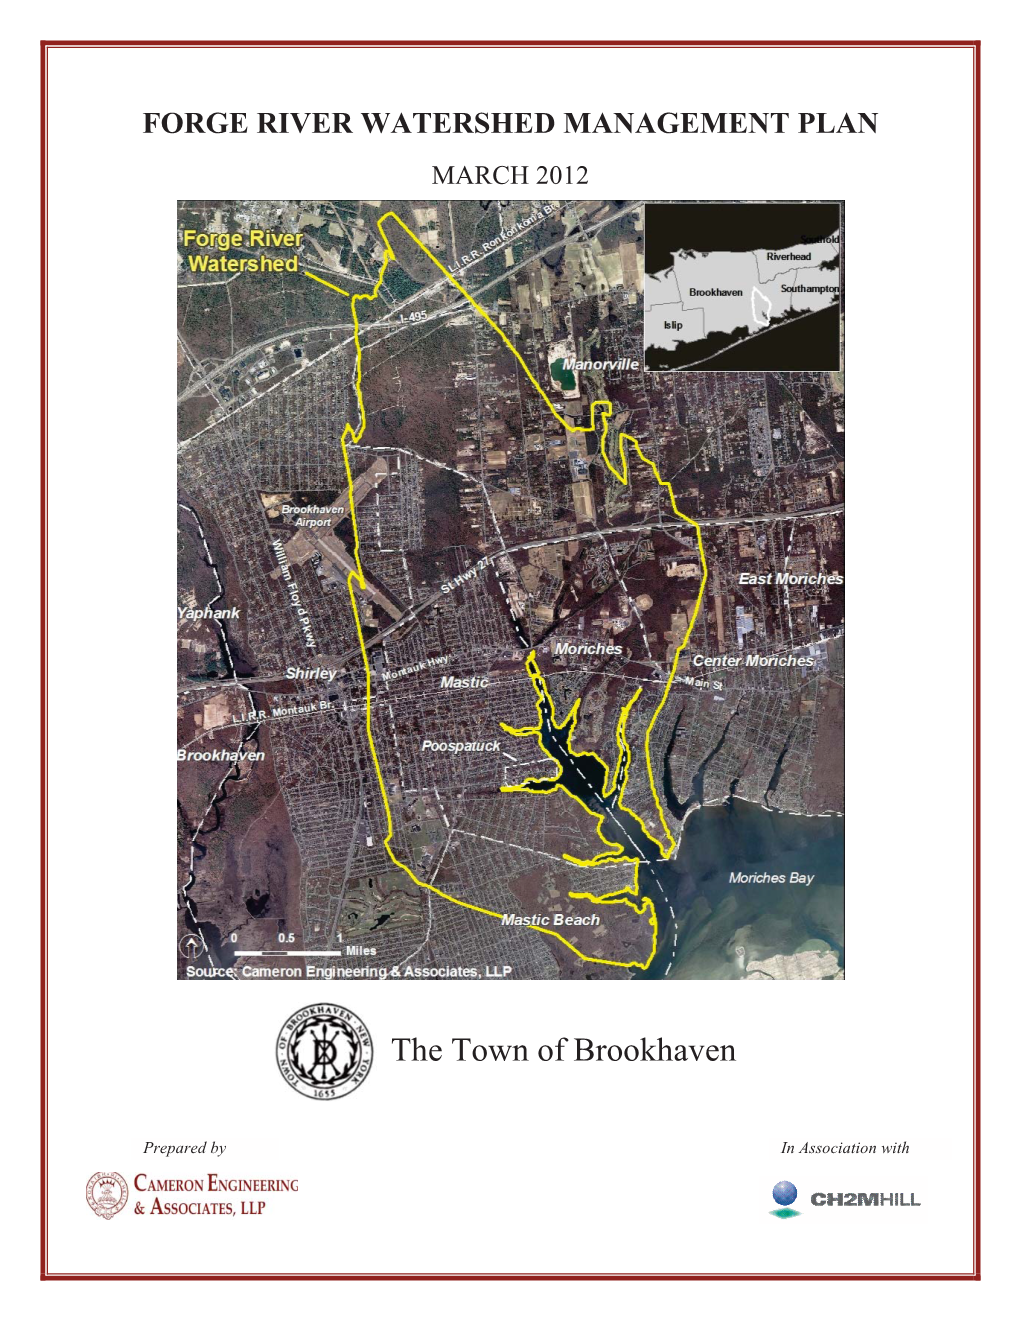 Forge River Watershed Management Plan March 2012